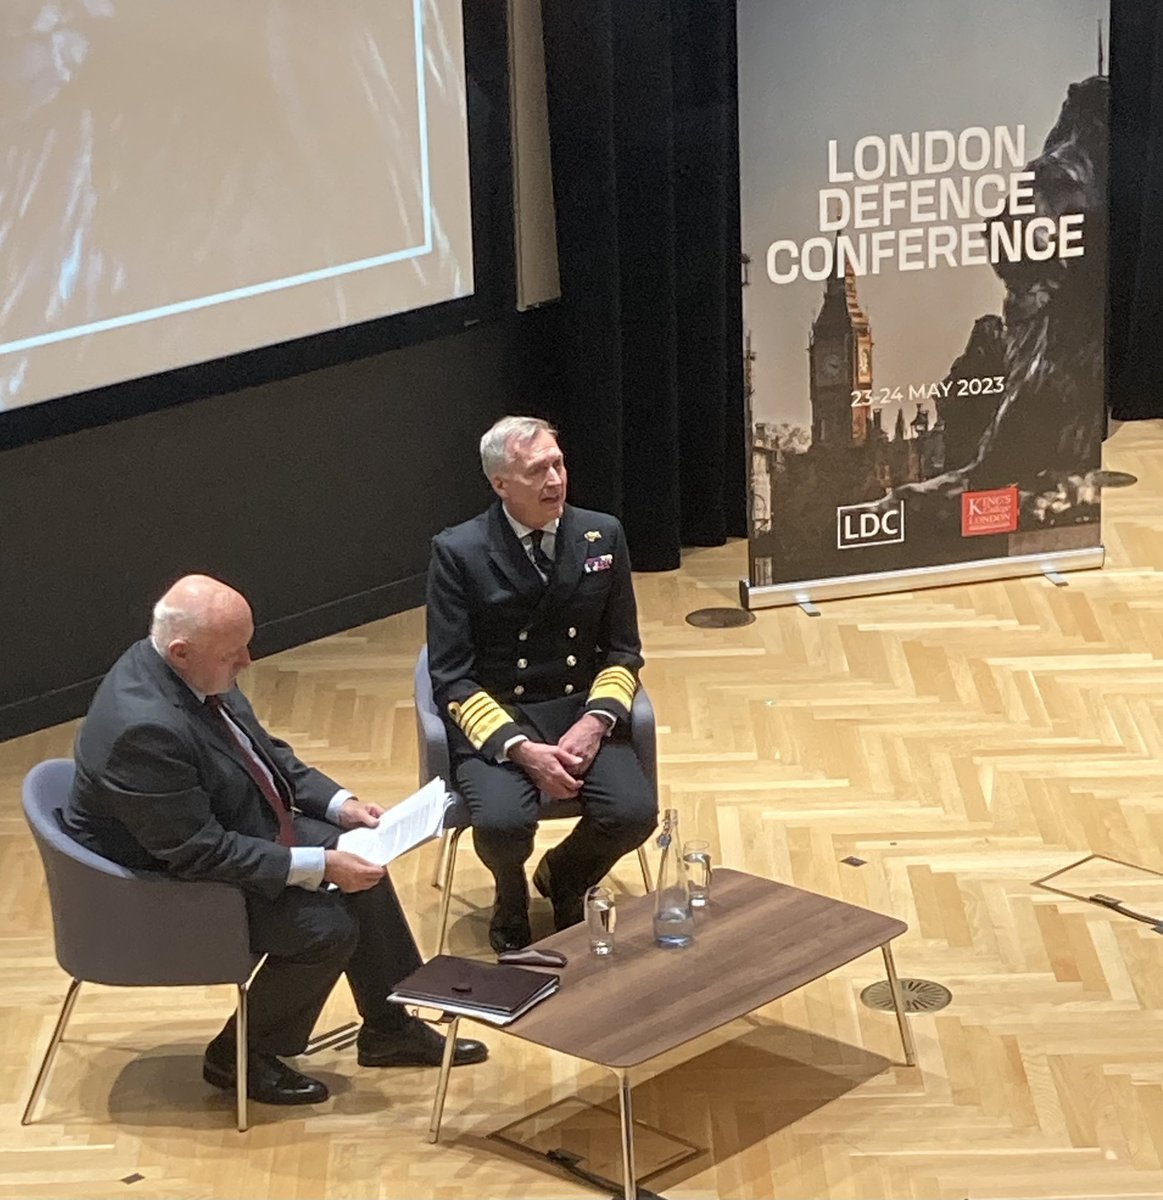 @AdmTonyRadakin_ closes out this year’s London Defence Conference #LDC2023 @KCLSecurity. It’s been an insightful and thought-provoking two days of discussions - looking forward to next year!